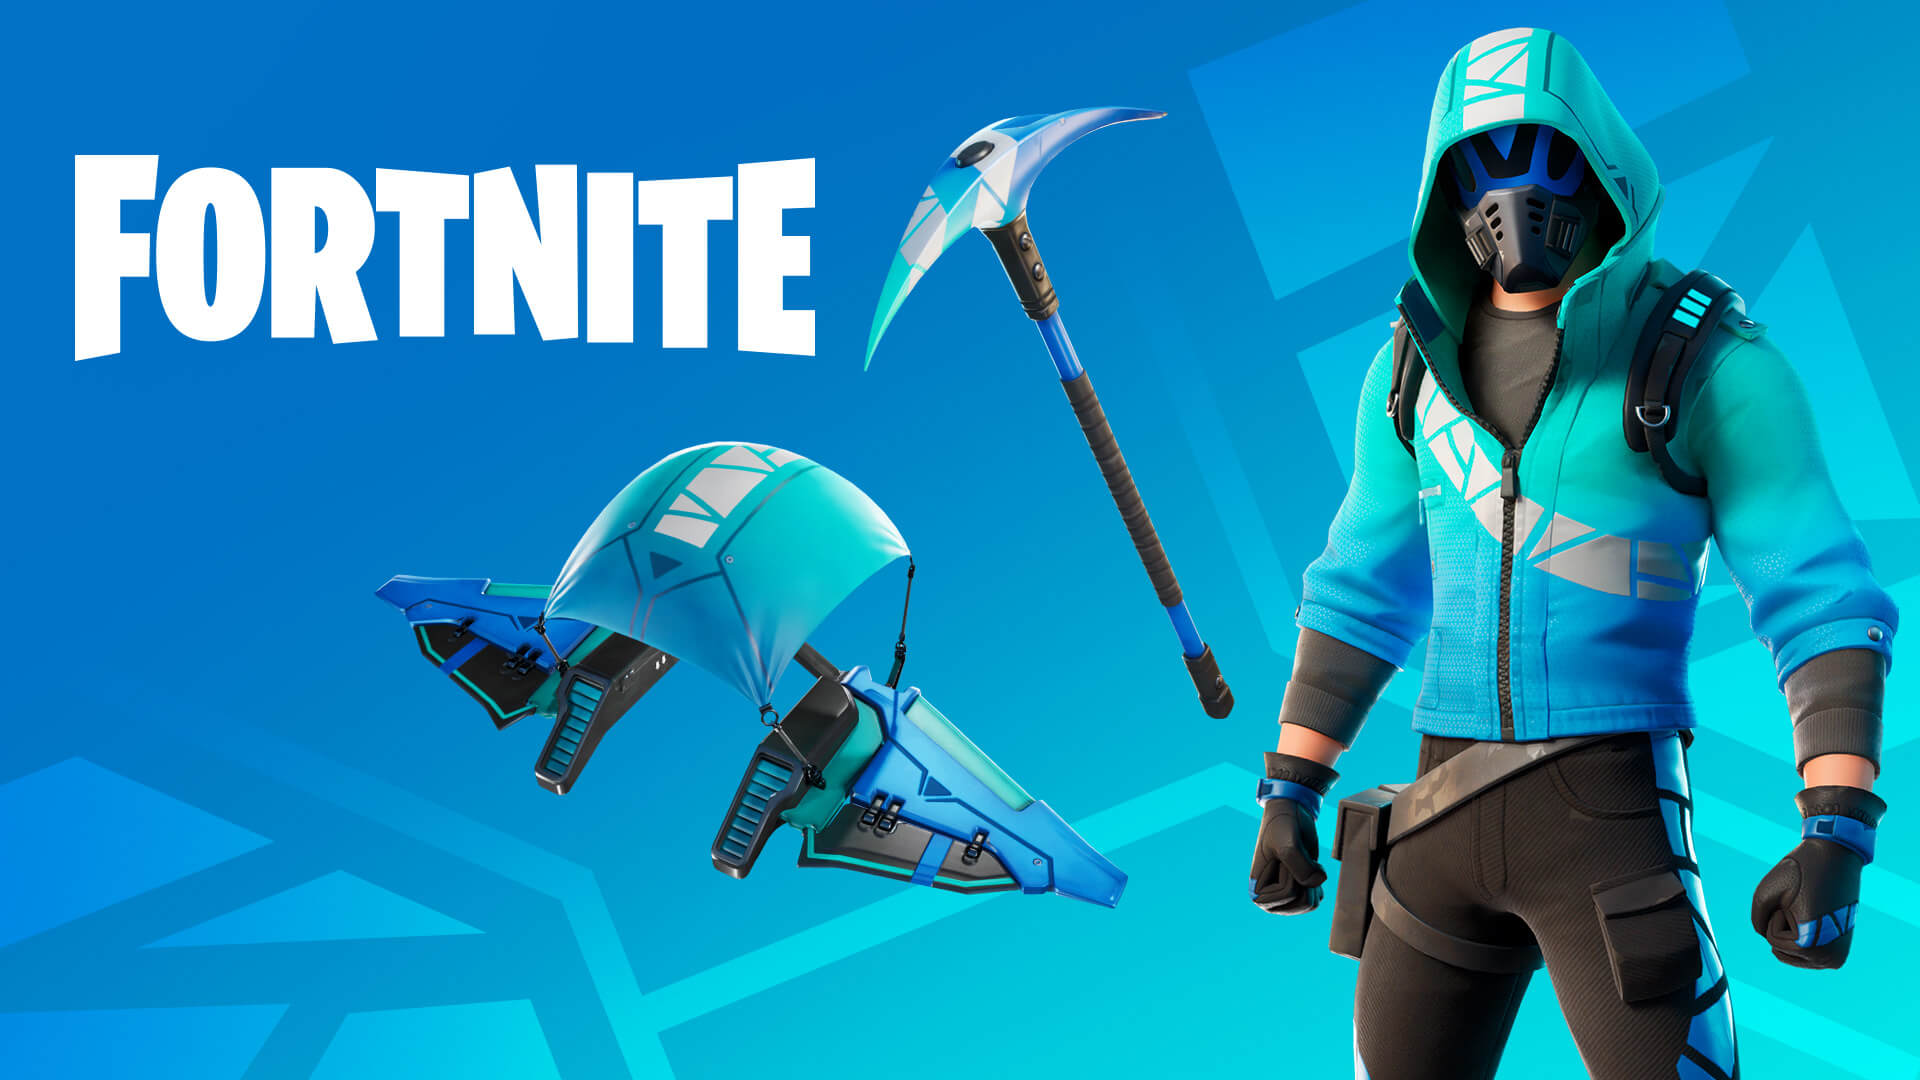 Backbling transforms into your last weapon when you switch. Cool concept, less than 200 characters!